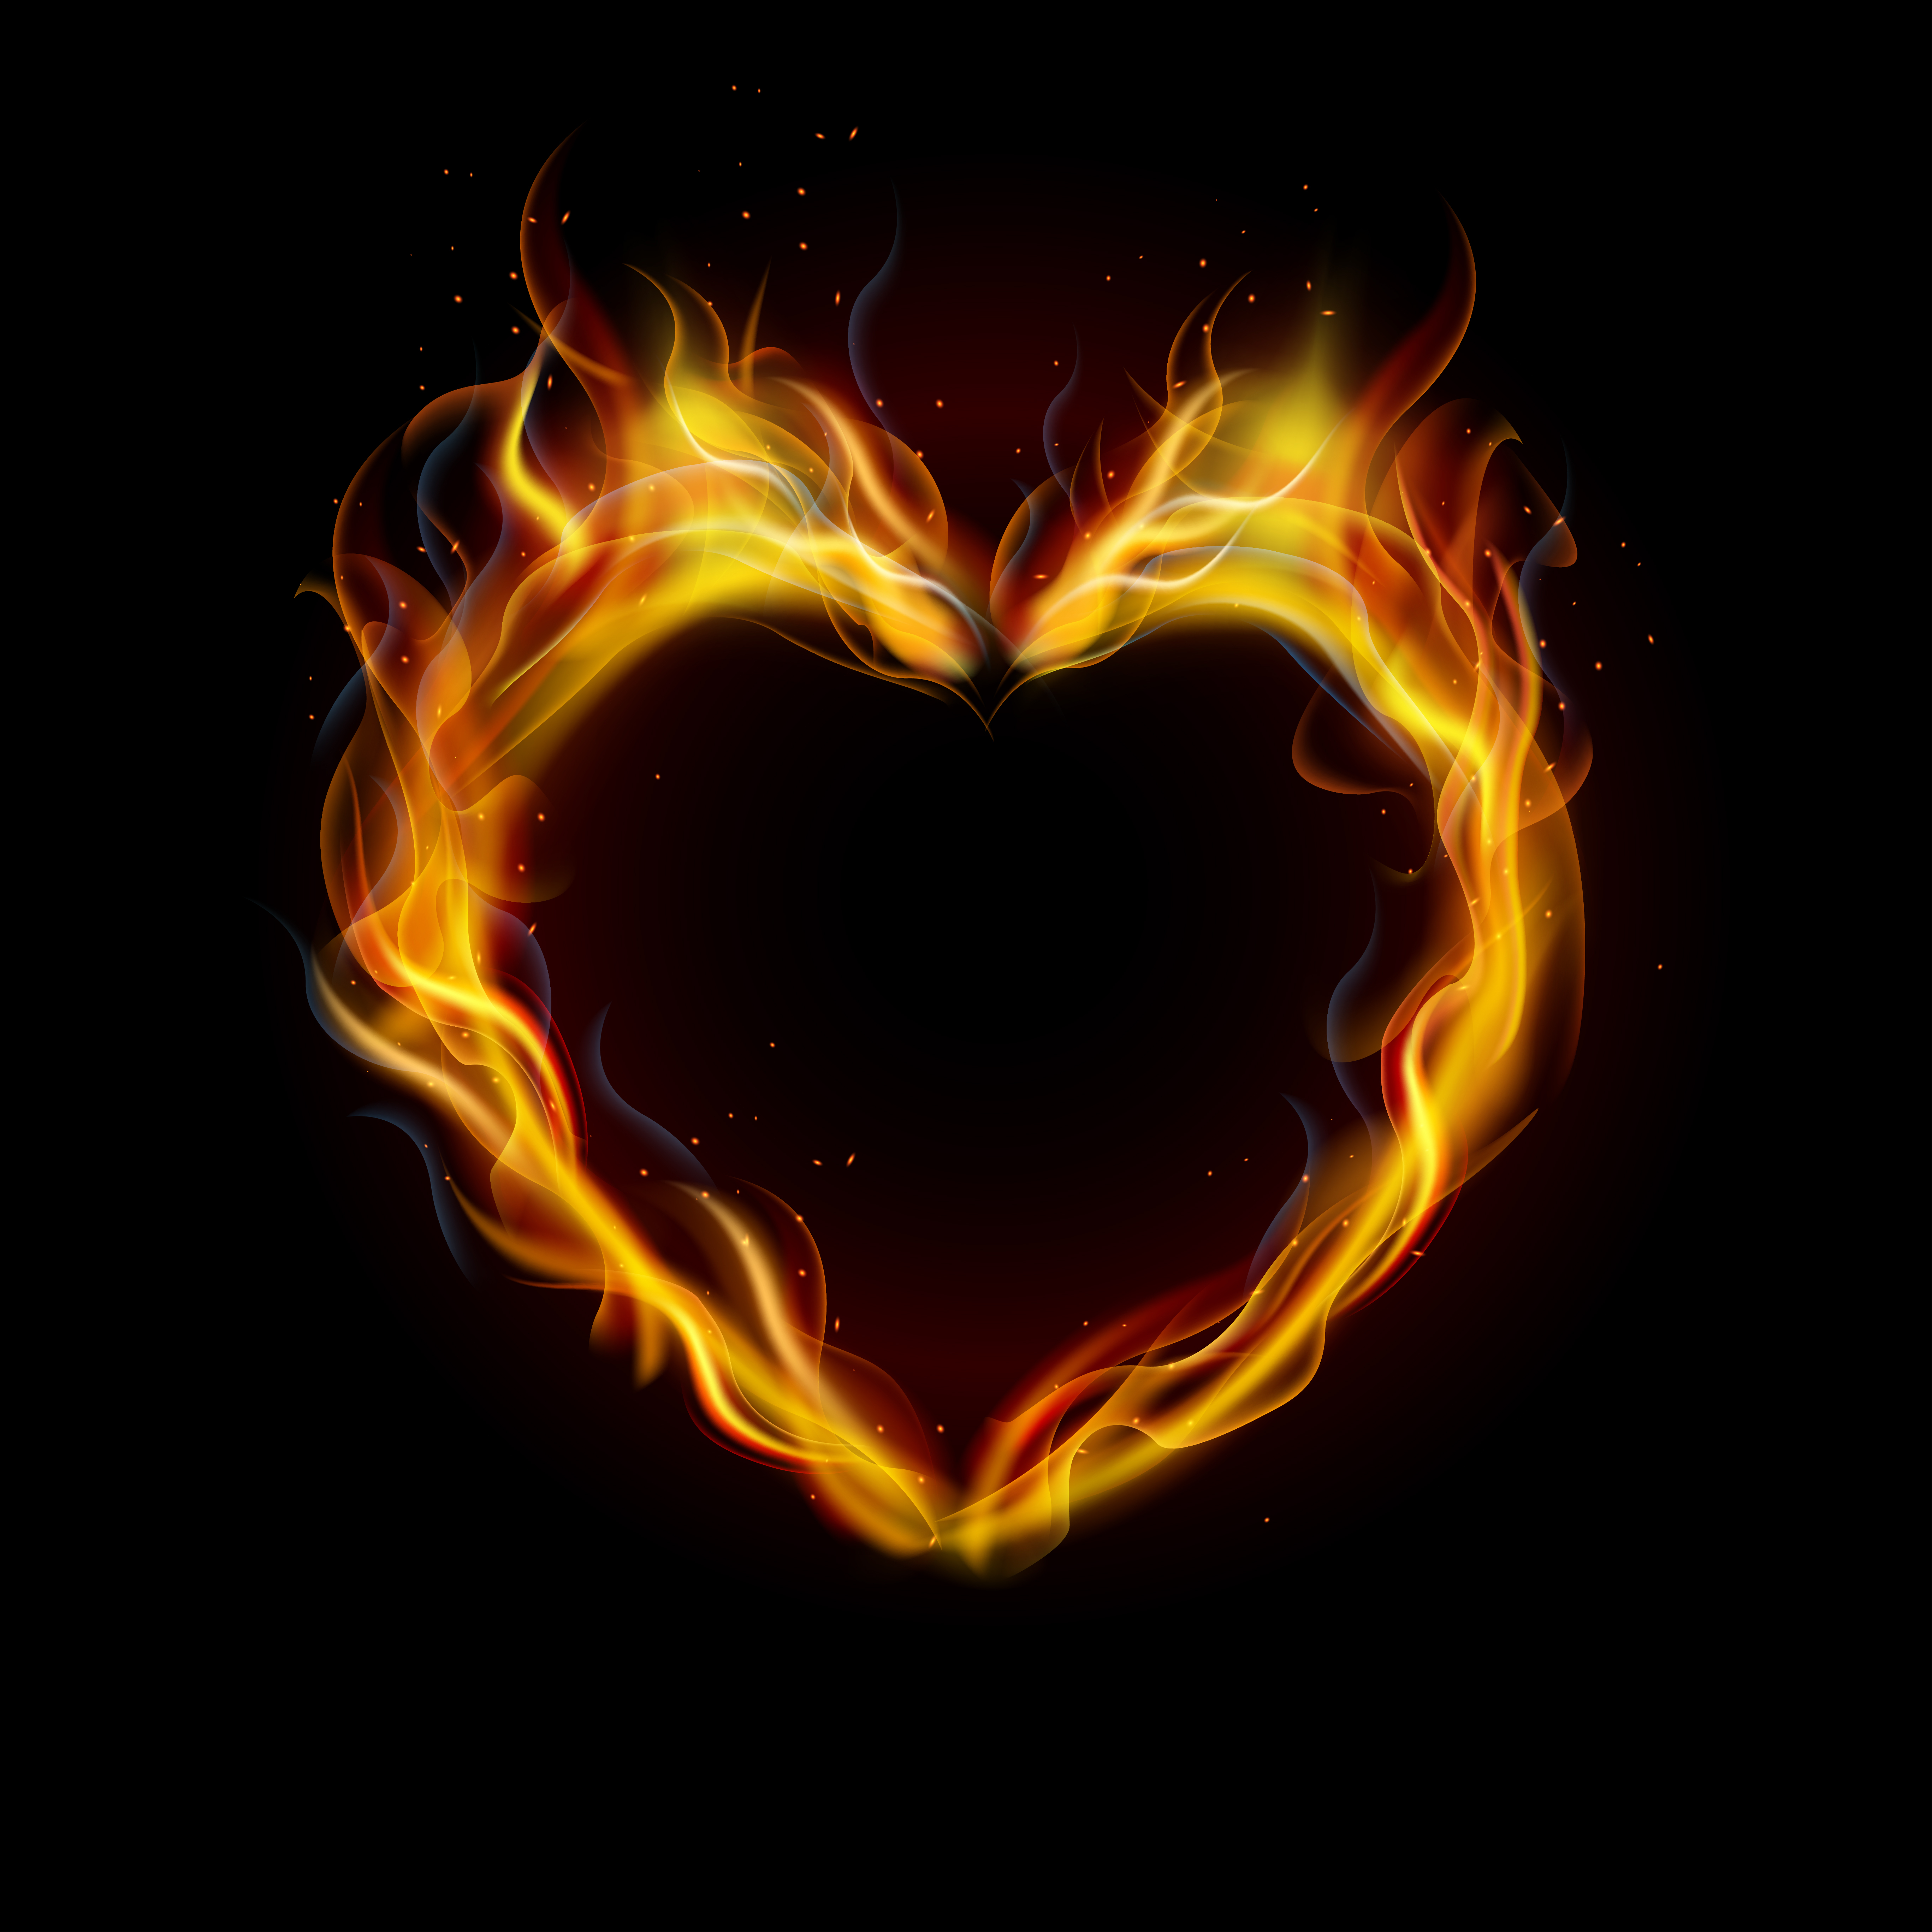 A love heart made out of fire